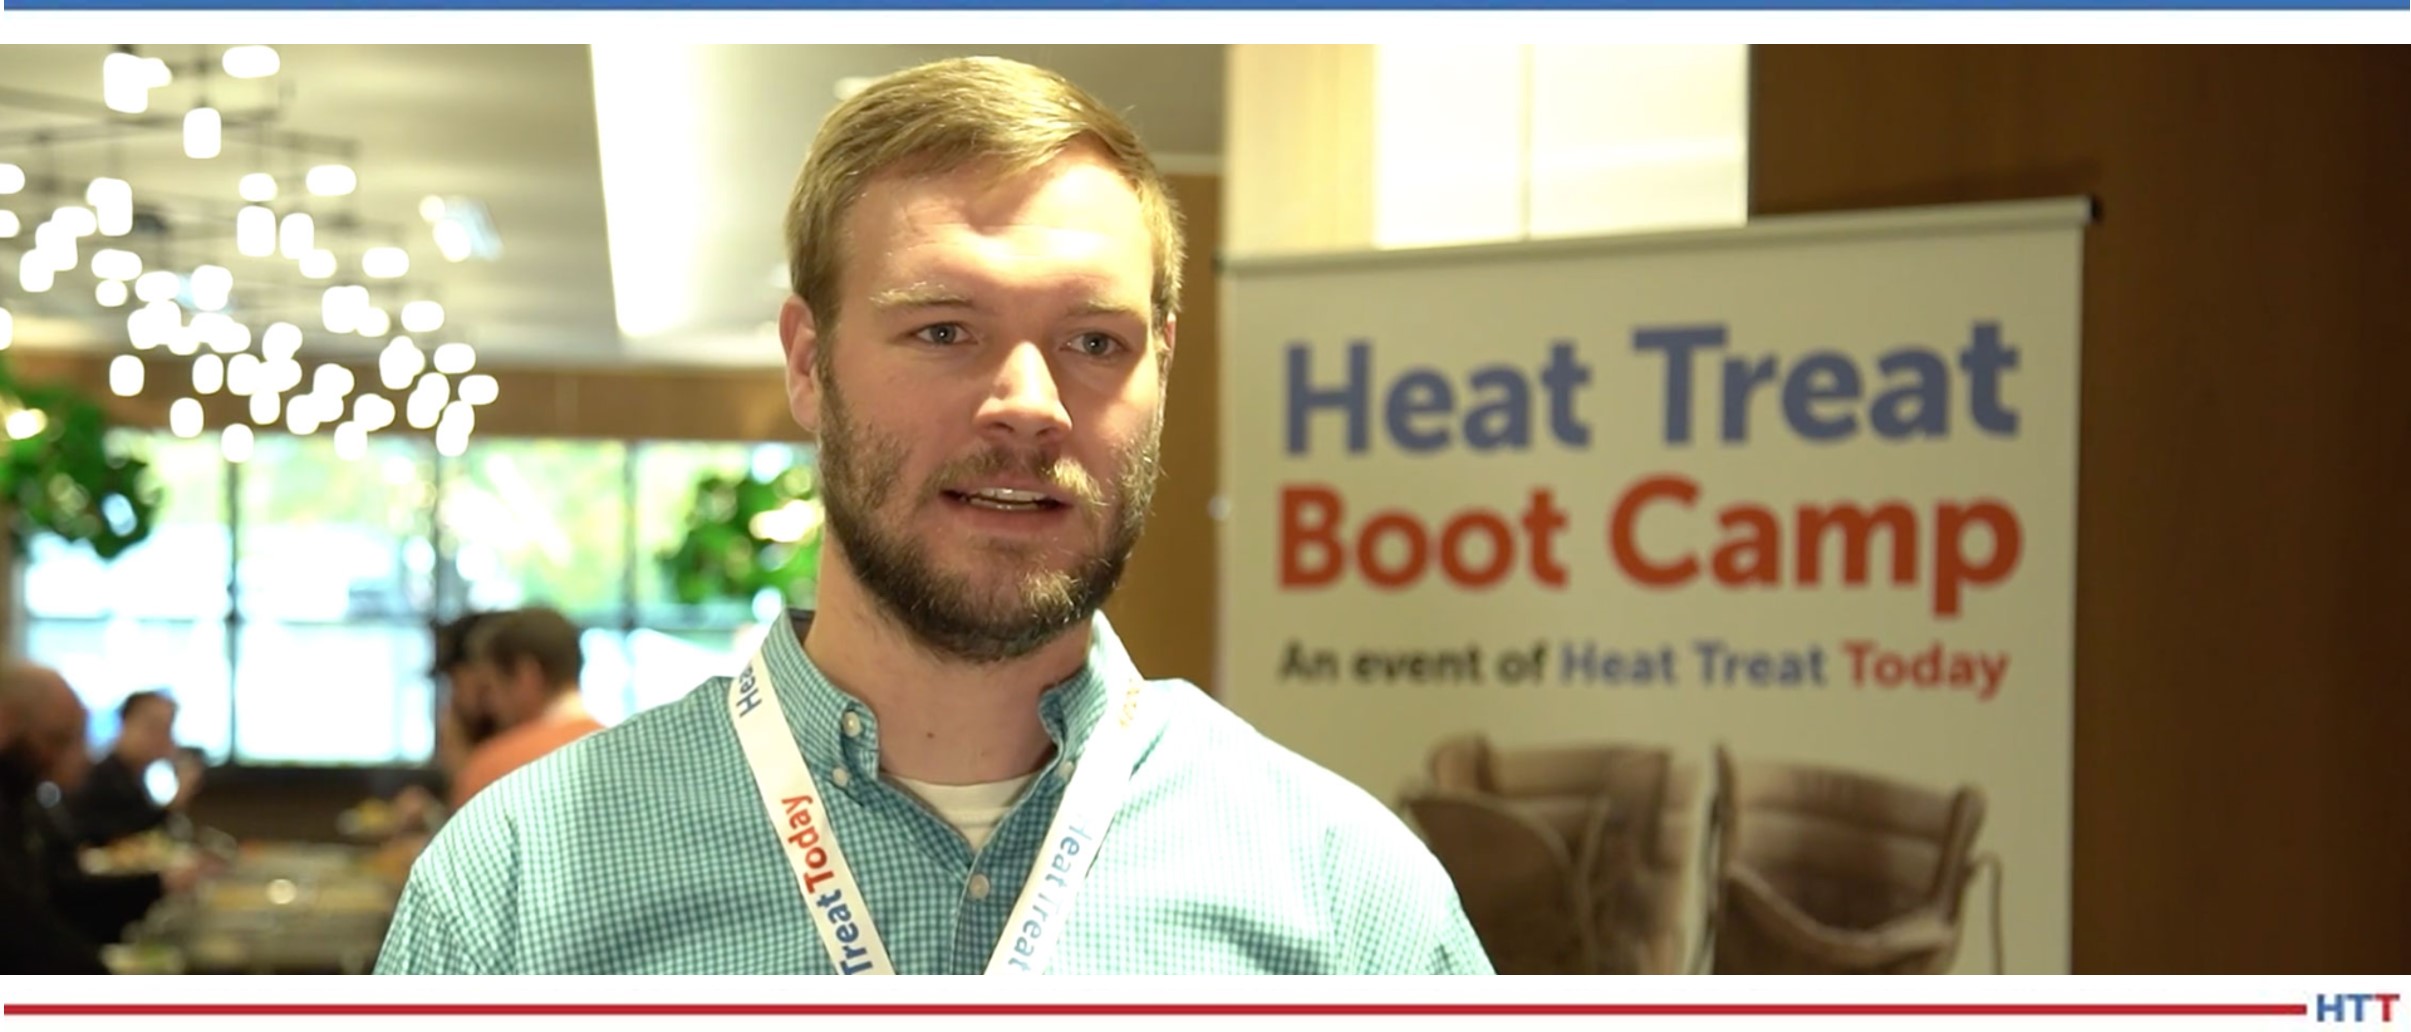 Testimonial from Heat Treat Boot Camp